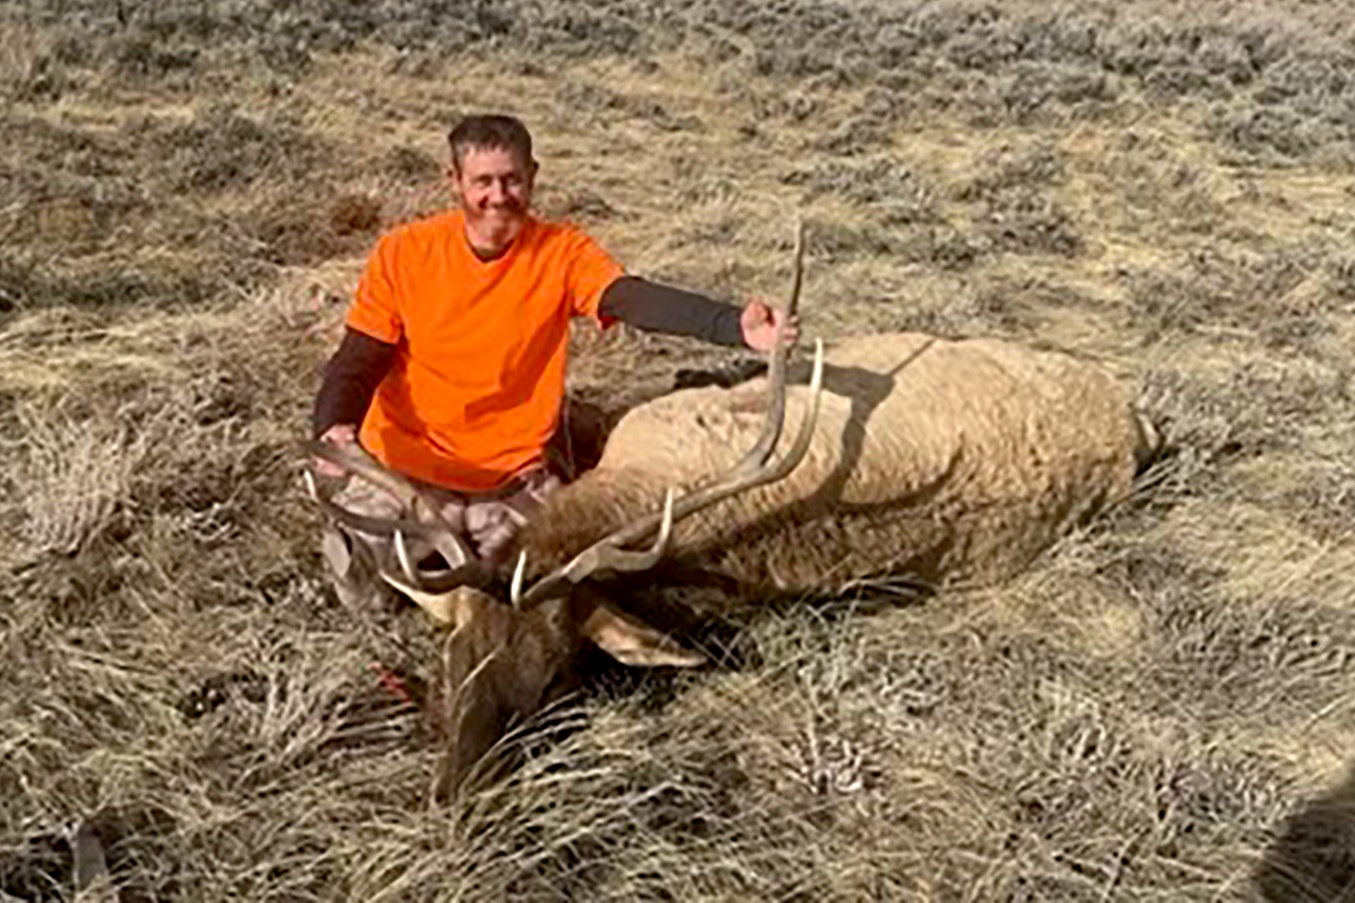 Rock Springs hunter and taxidermist Marc Zancanella was hunting elk Saturday when he discovered a bleached-white human skull in Wyoming's vast Red Desert.